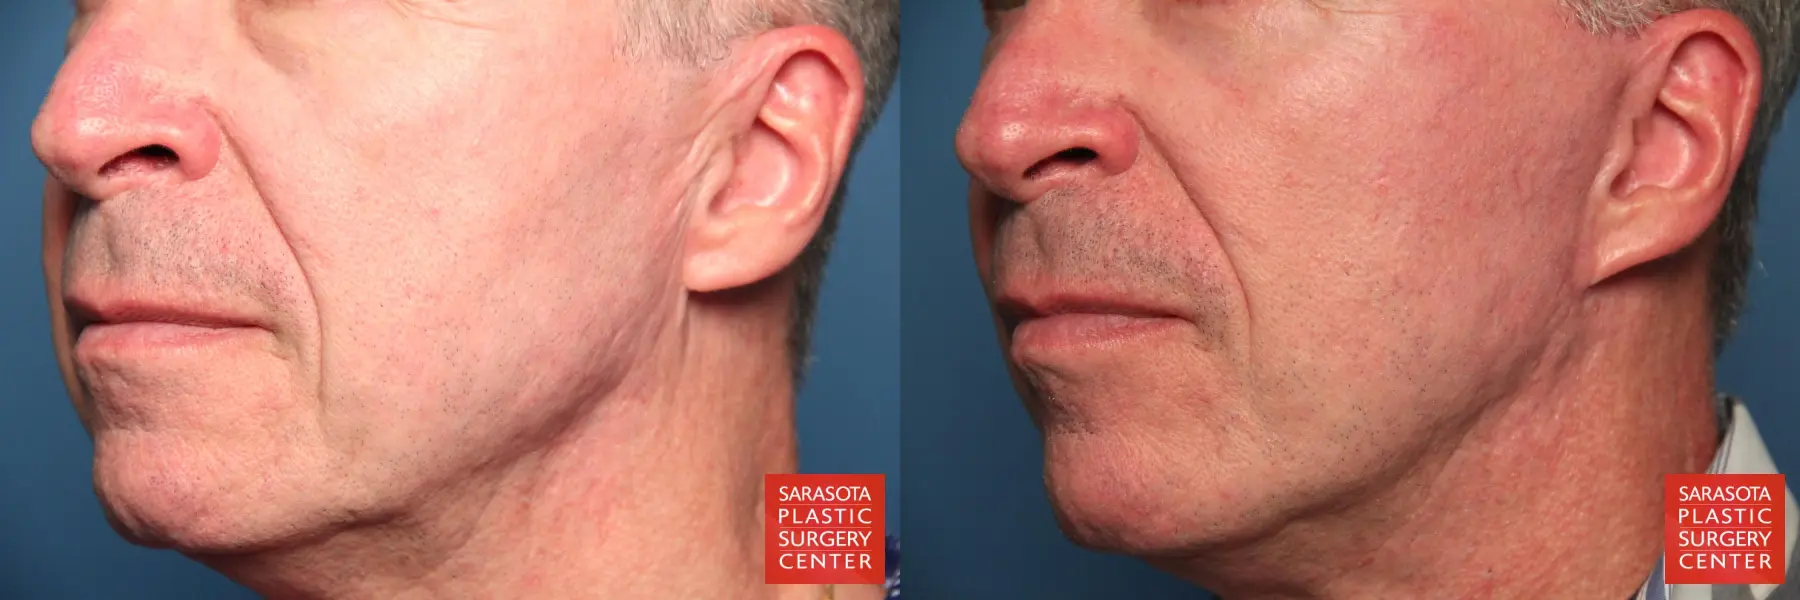 Fat Transfer   Face For Men: Patient 1 - Before and After 3